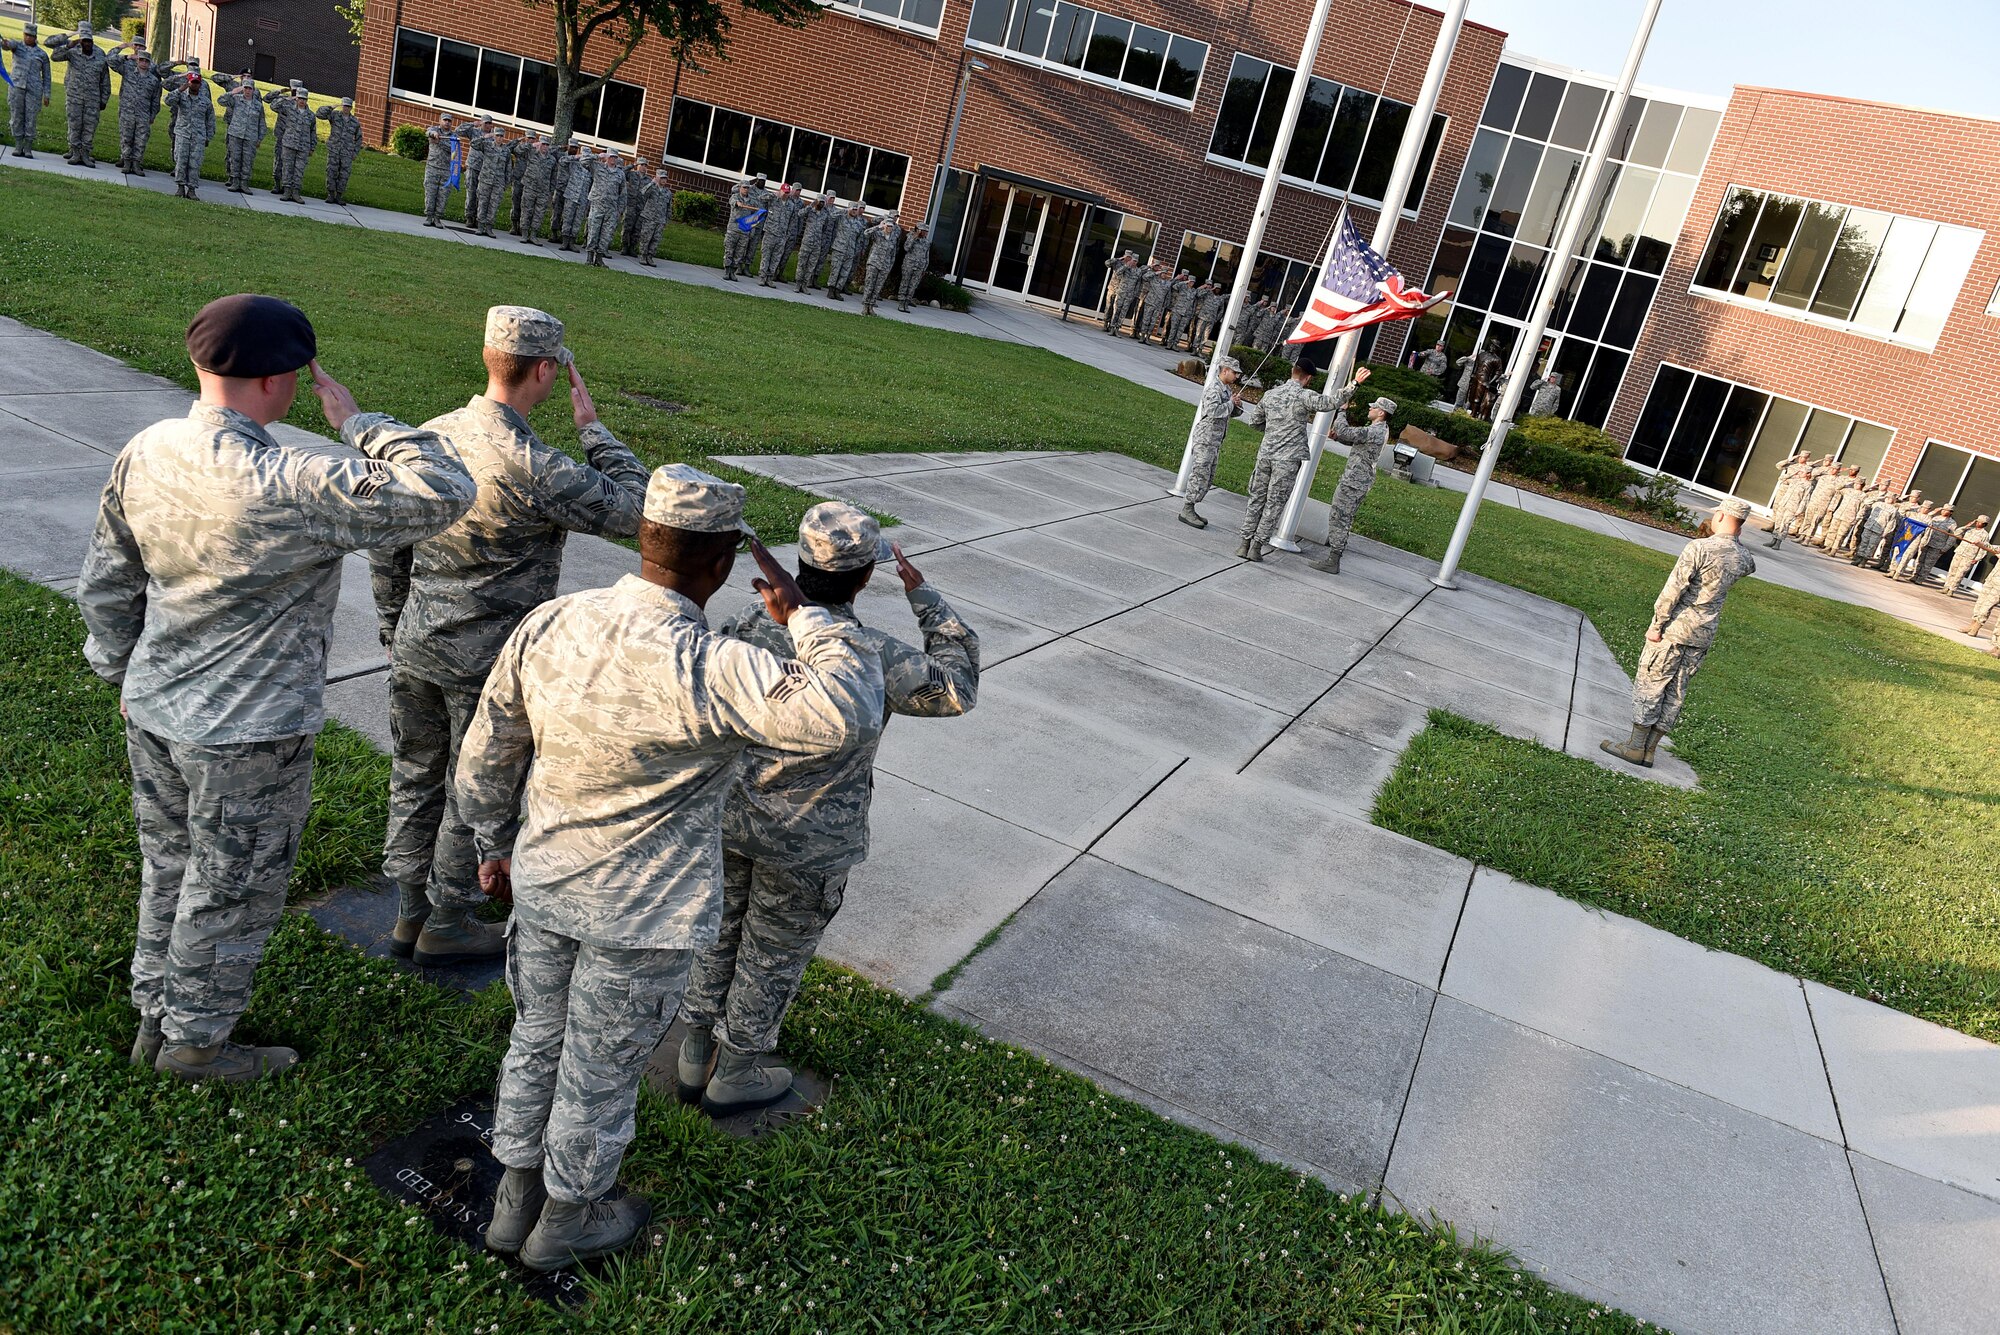 Senior Airmen in Airman Leadership School, classes 17-6 and 17-7 raise the flag, June 13, 2017, during morning reveille at the I.G. Brown Training and Education Center in Louisville, Tenn. About 42 Airmen in 17-6 will graduate their phase-two portion of the blended-learning course during a banquet this Friday. There are 163 Airmen in Class 17-7, undergoing the five-week in-resident course, which holds their graduation banquet June 29. (U.S. Air National Guard photo by Master Sgt. Mike R. Smith)